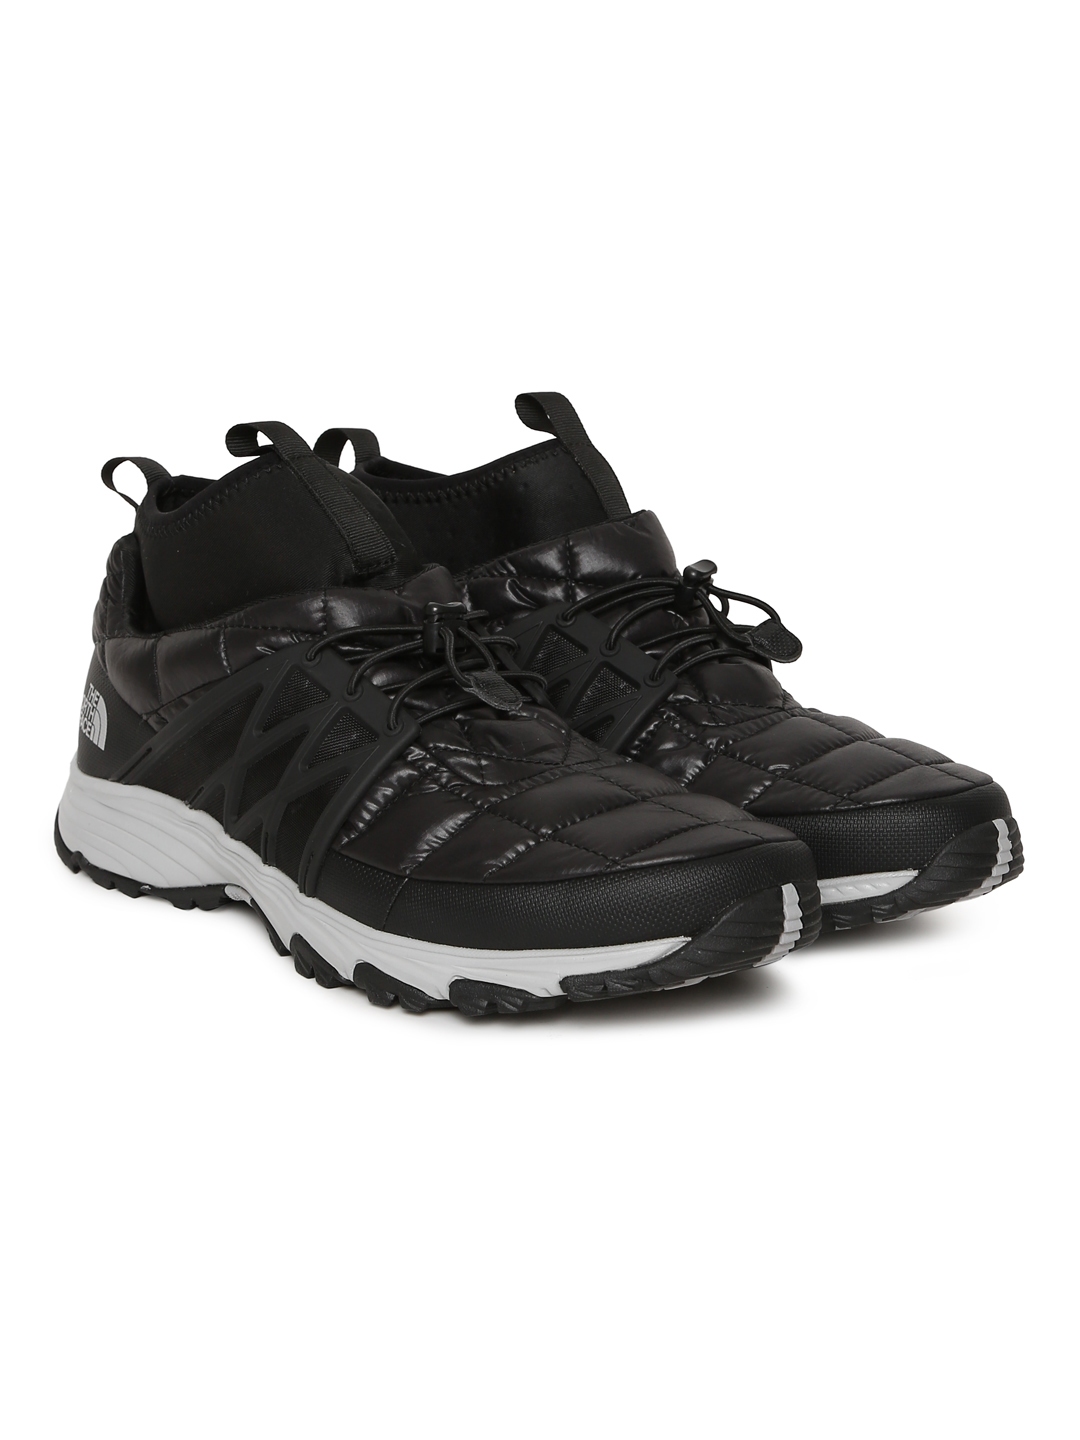 Buy The North Face Men Black Running Shoes - Sports Shoes for Men